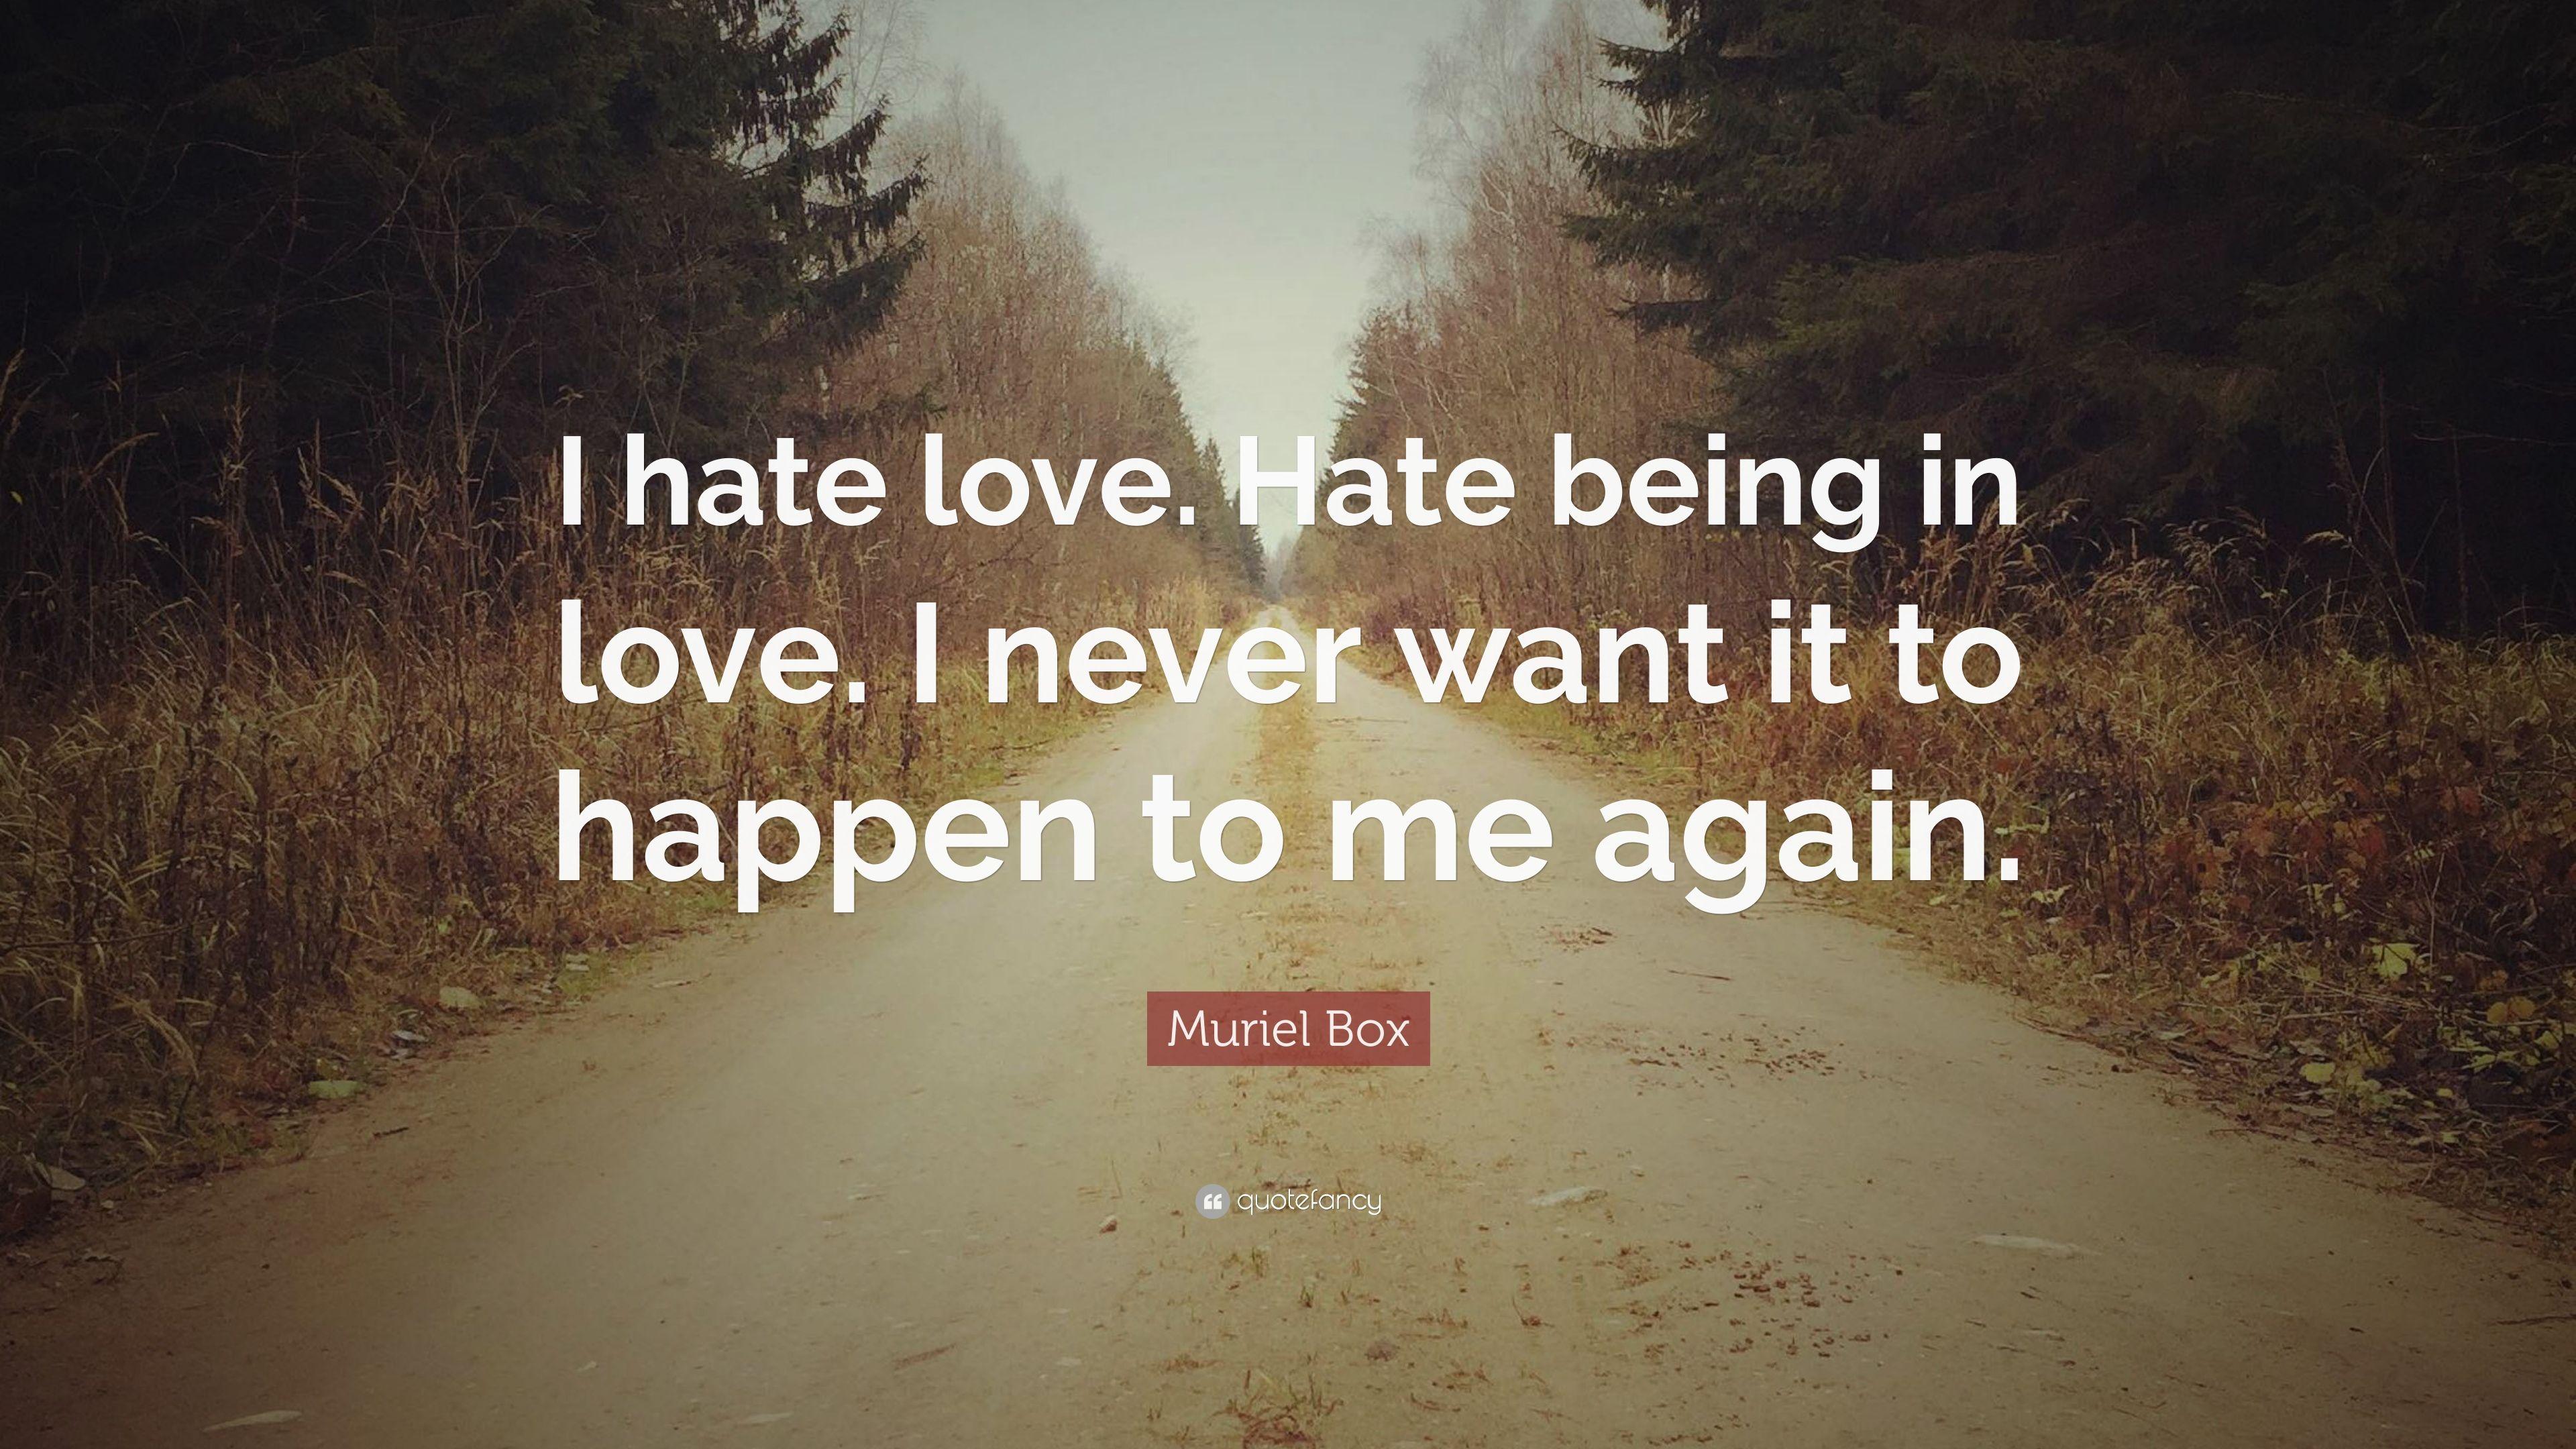 Muriel Box Quote: “I hate love. Hate being in love. I never want